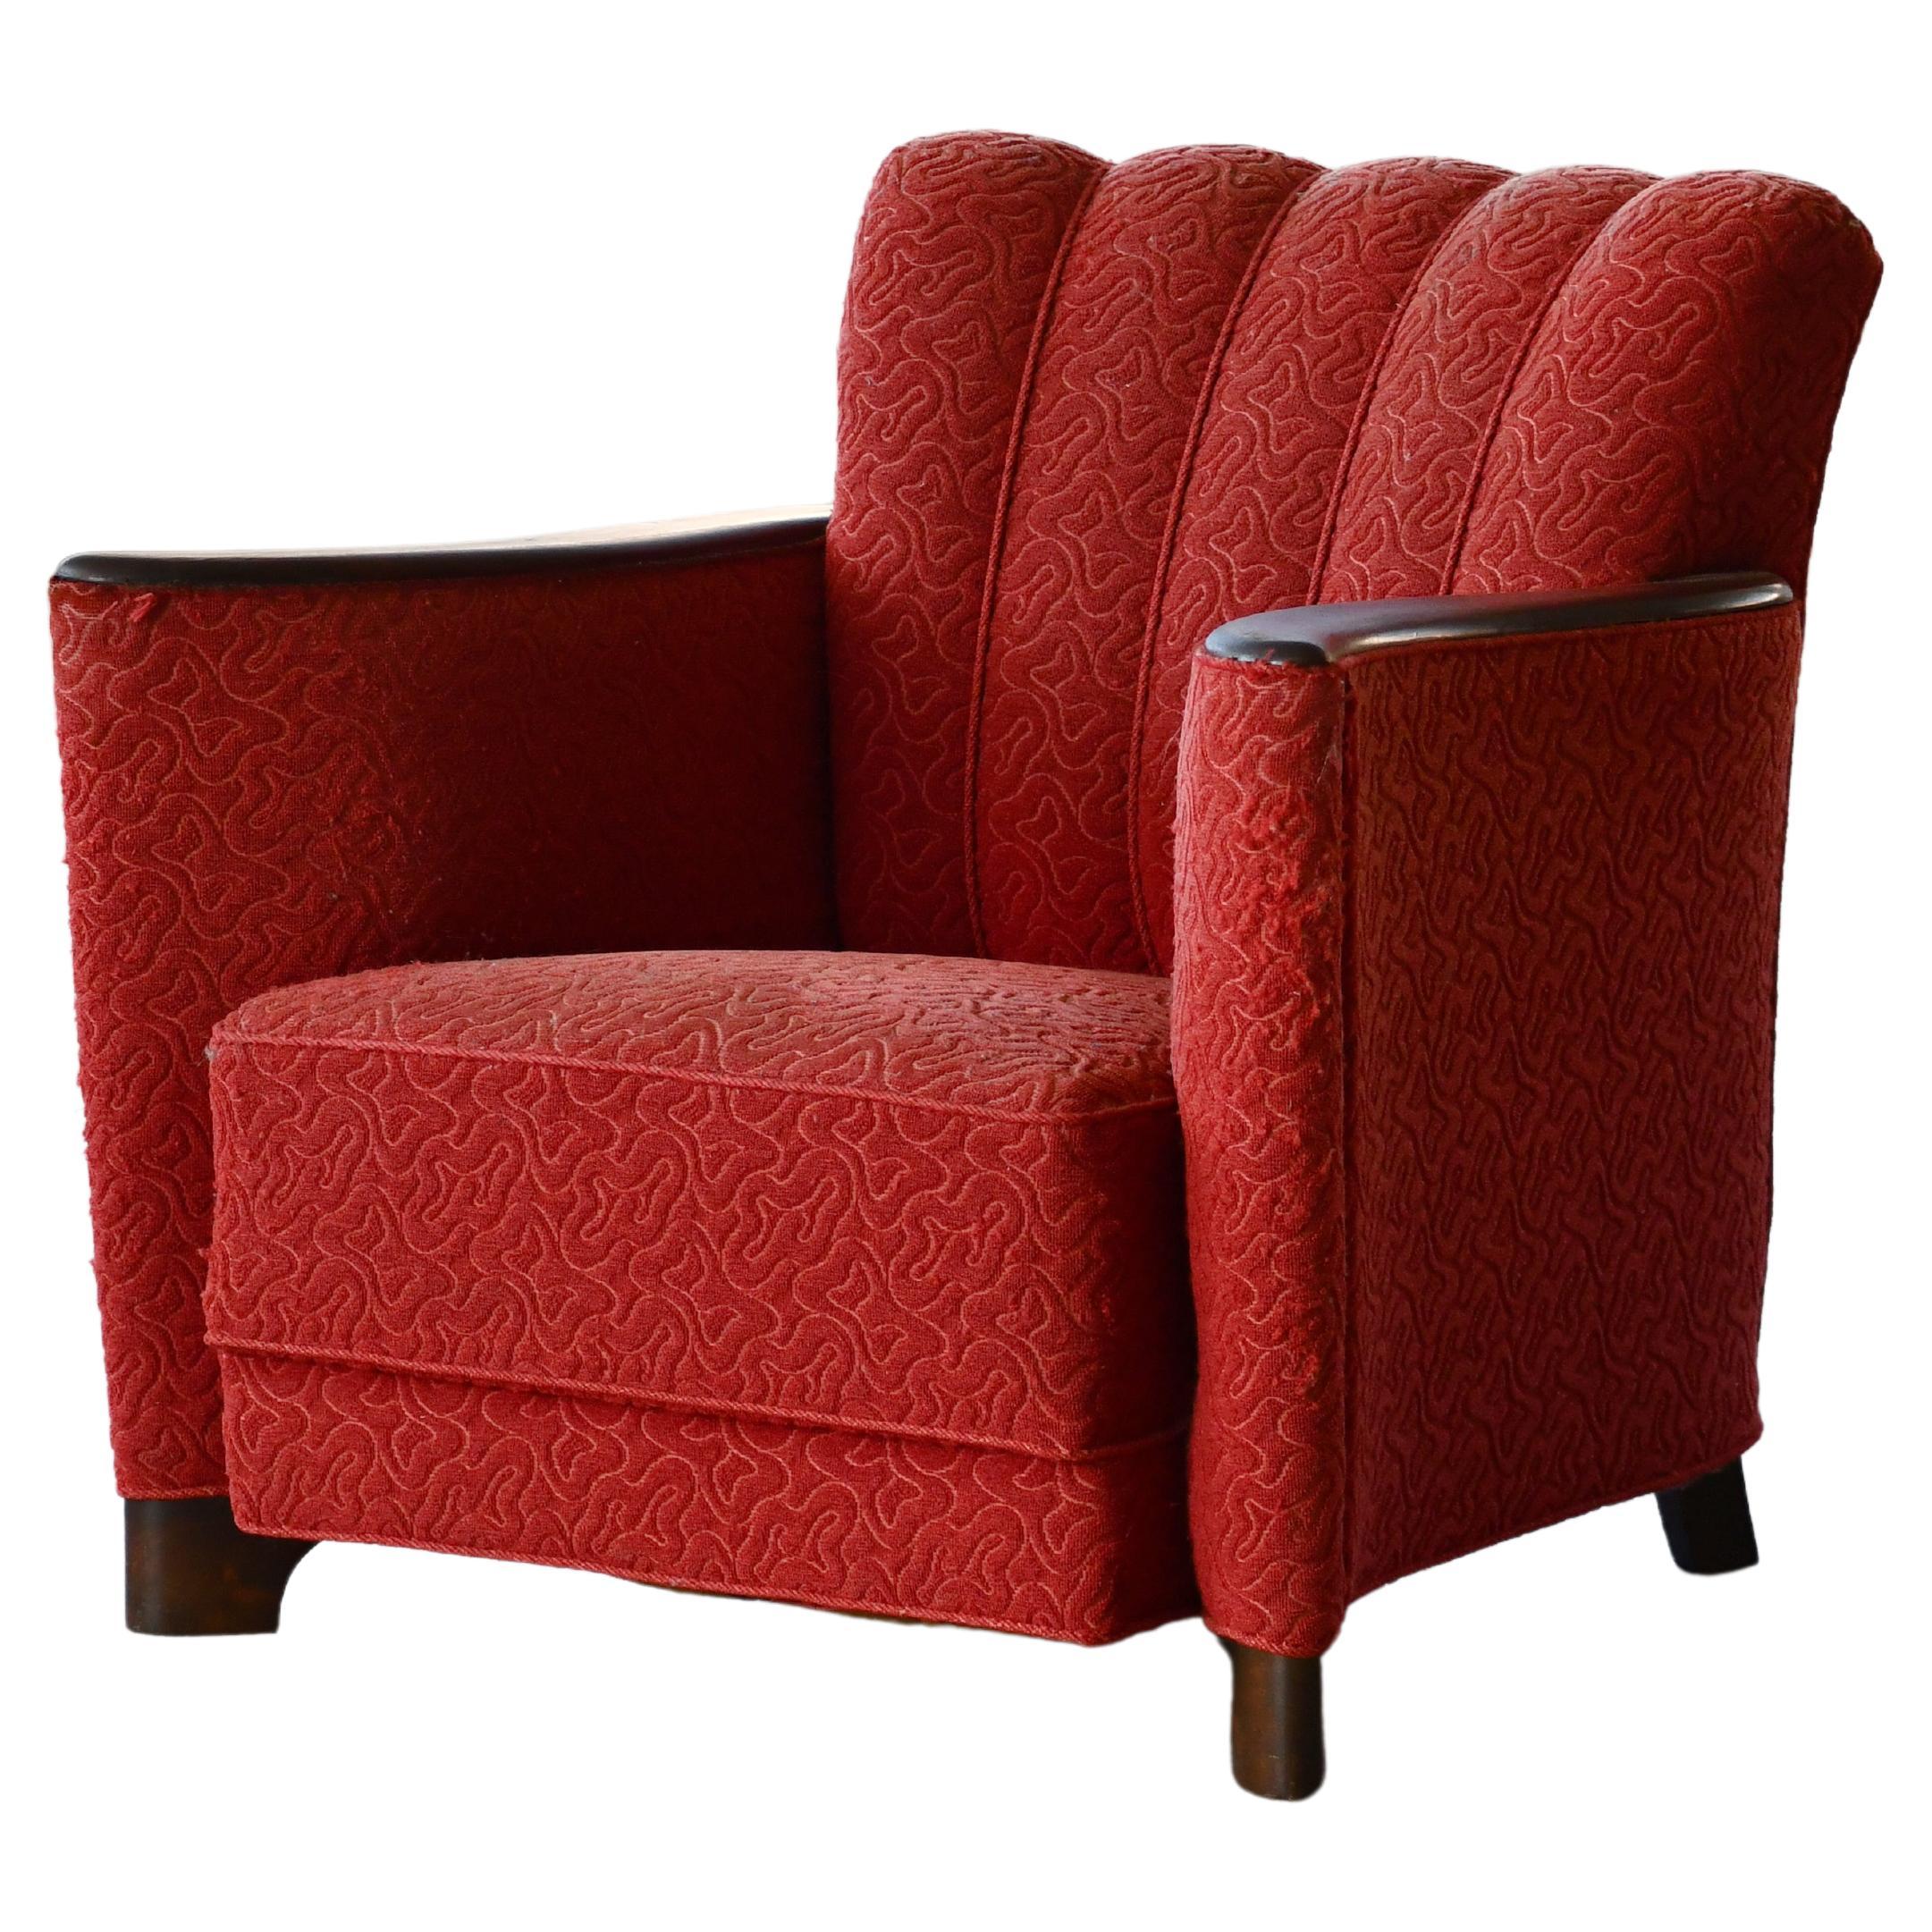 Danish 1930s Art Deco Lounge Chair in Red Mohair with Mahogany Accents